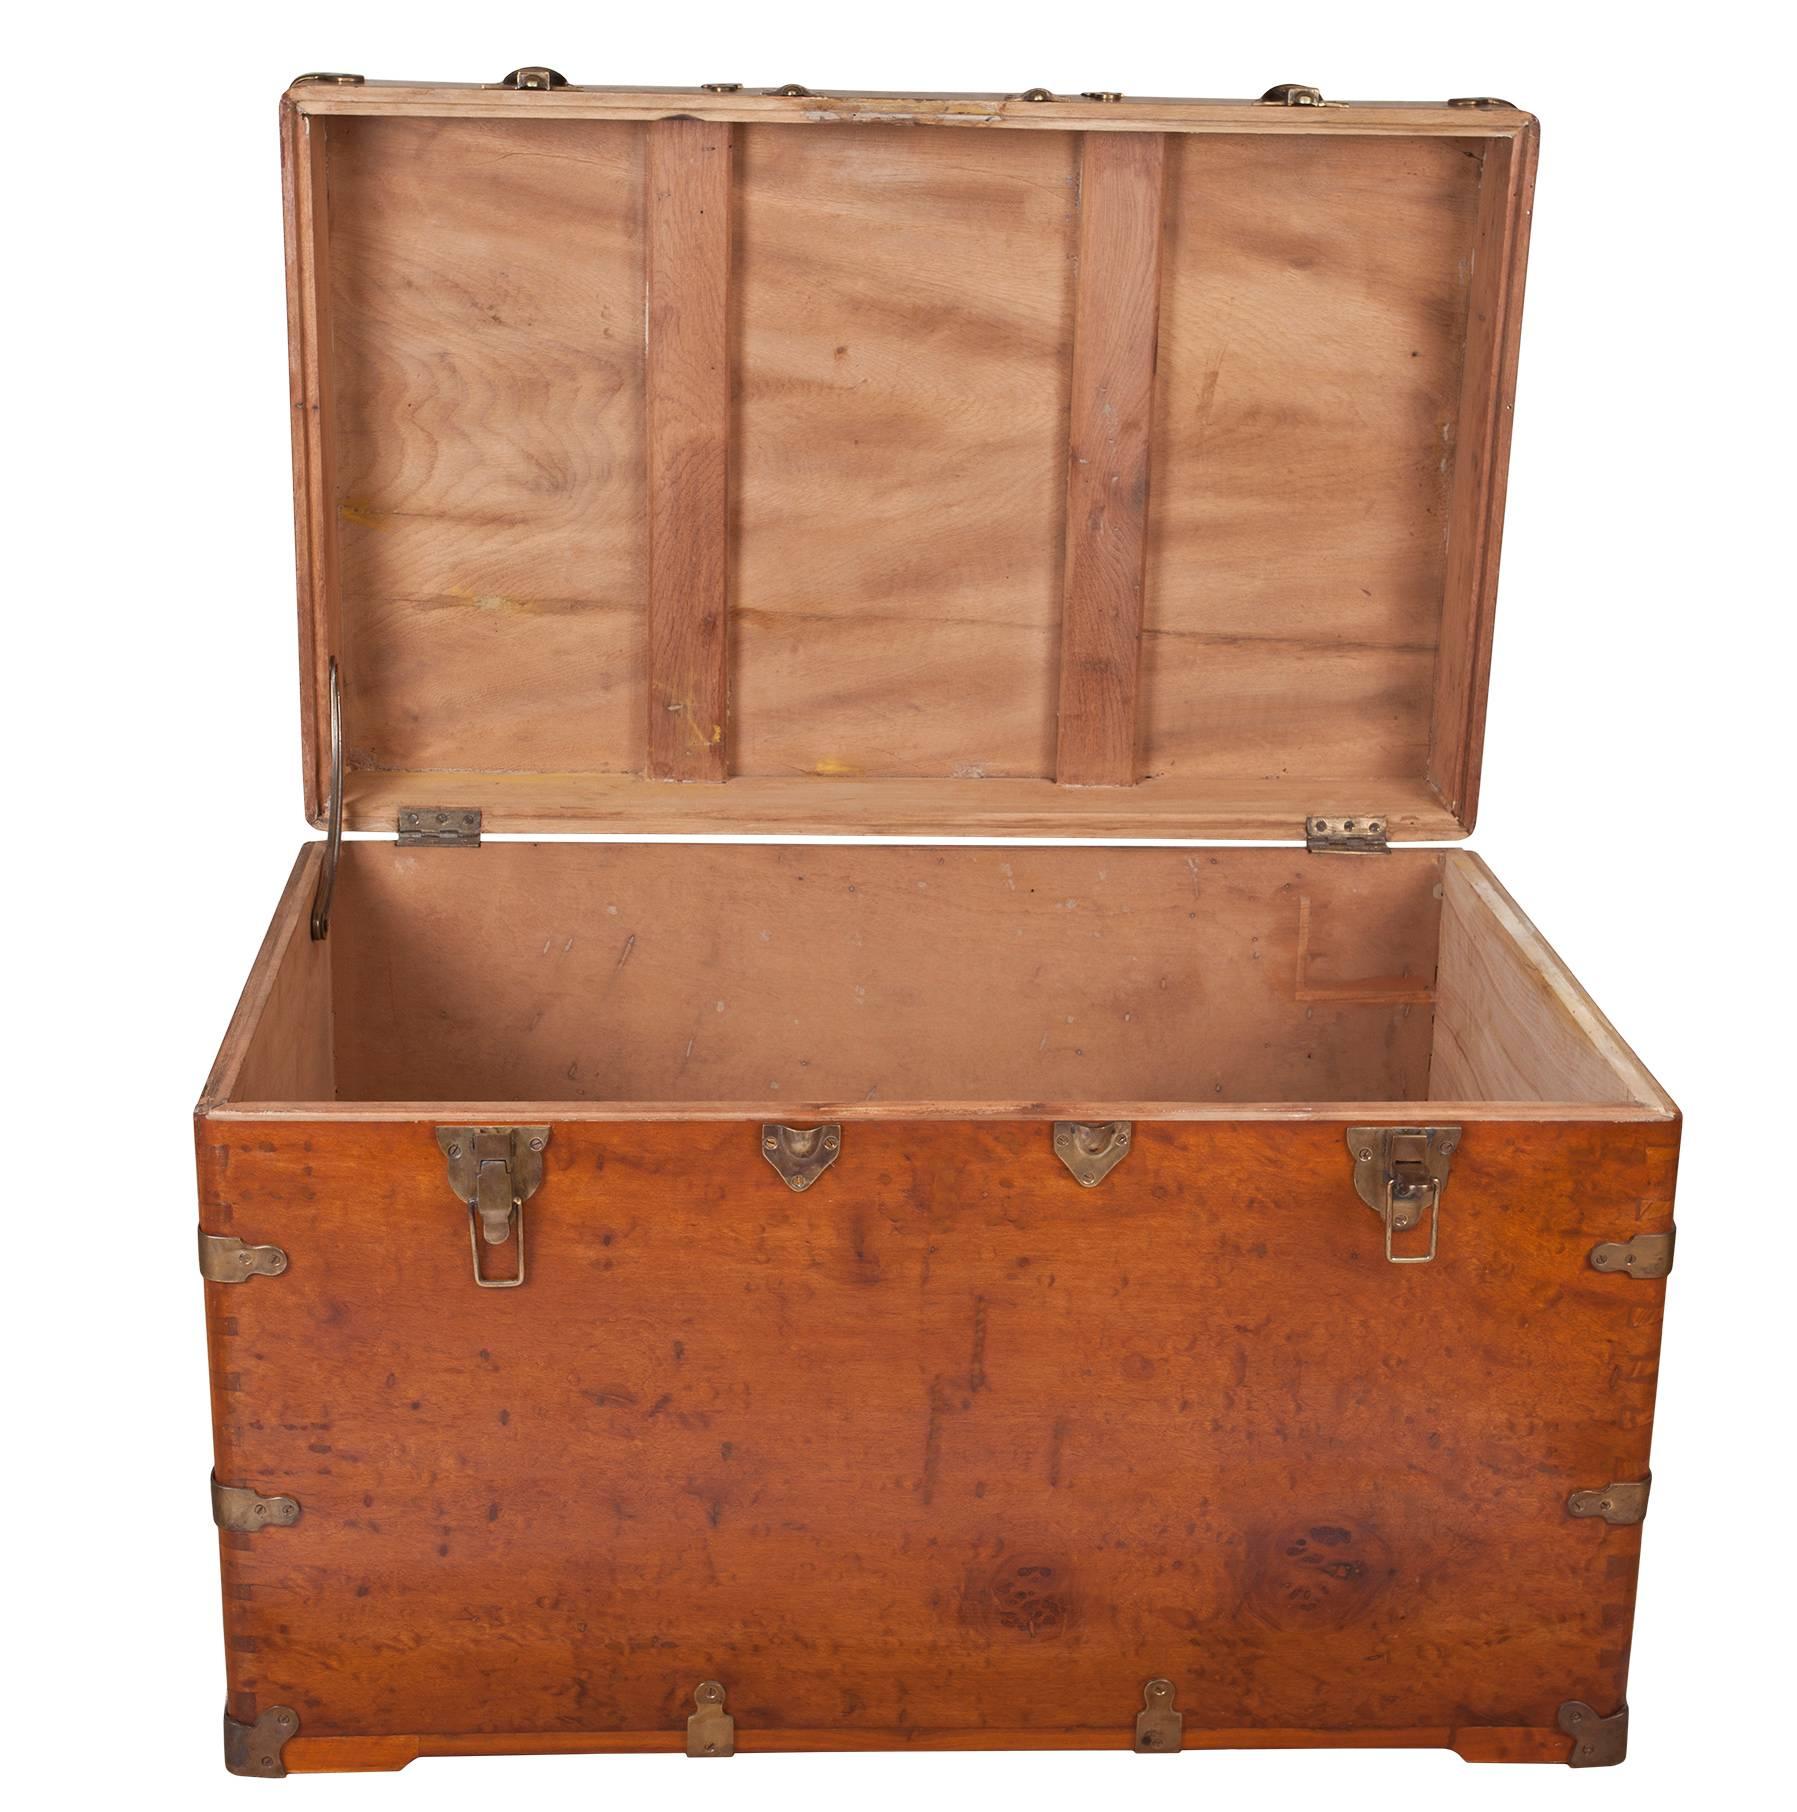 Campaign Late 19th Century Camphor Wood Sea Chest with Brass Hardware